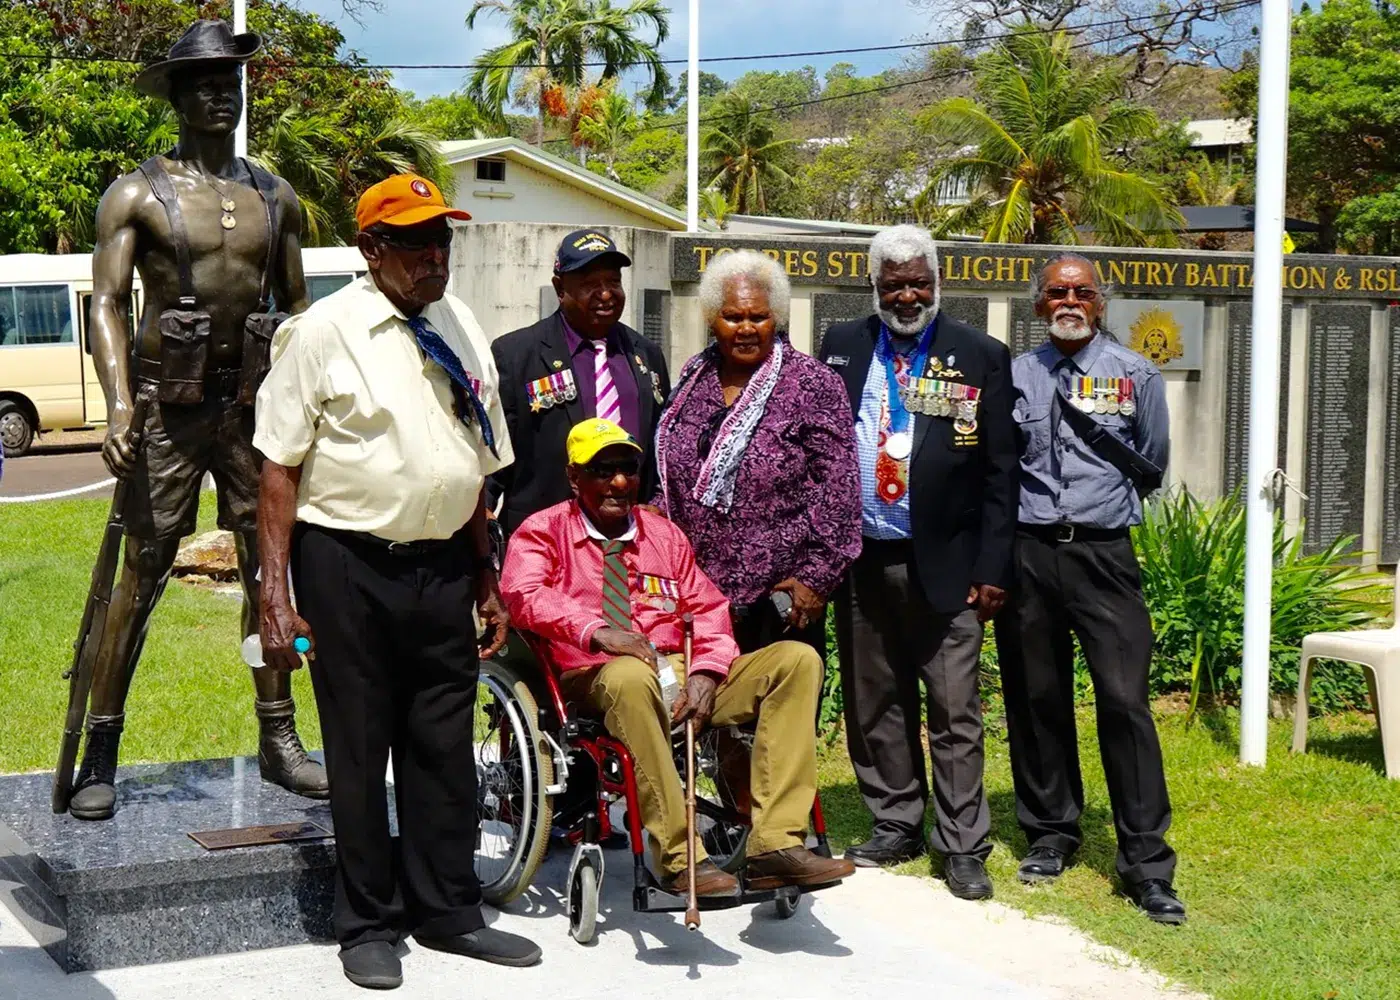 Diverse group of individuals, some with military medals, posing proudly with a bronze soldier statue by Sculpt Studios in an outdoor setting.